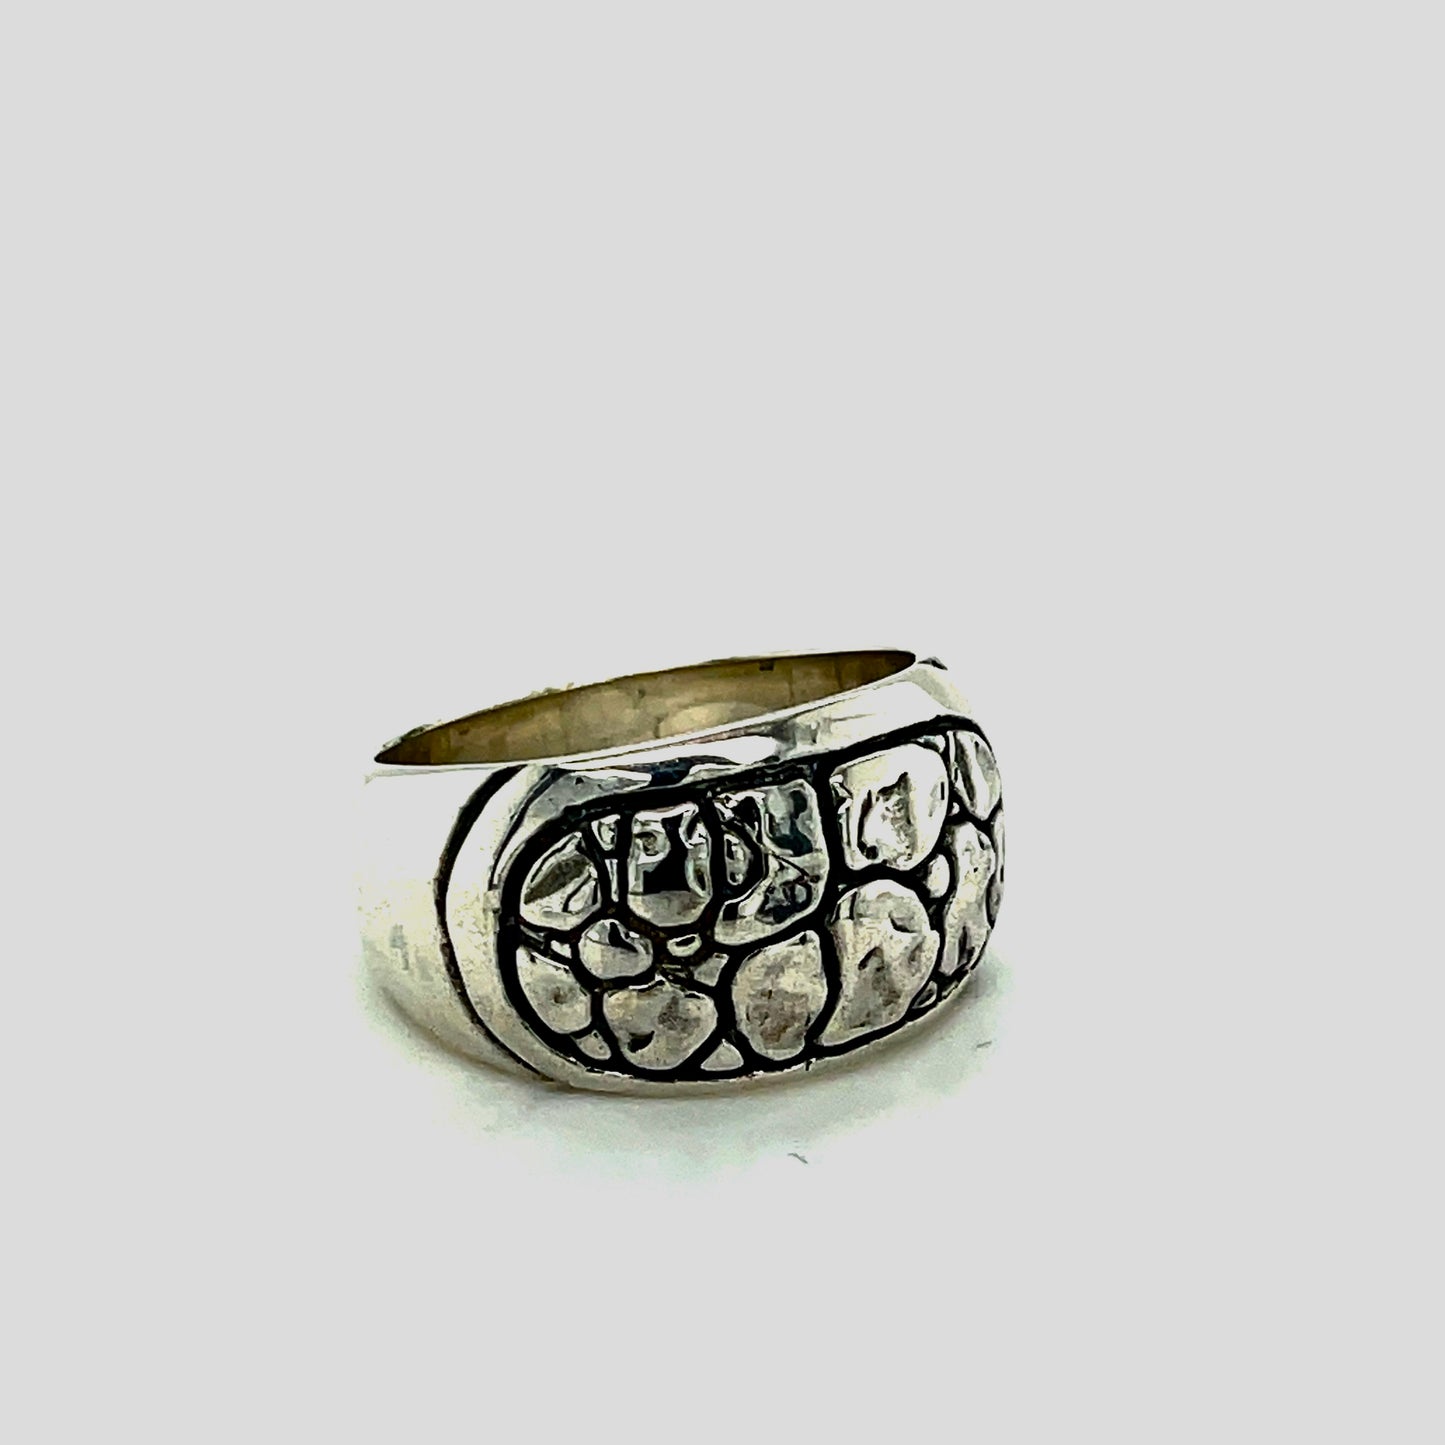 Silver ring with crocodile pattern